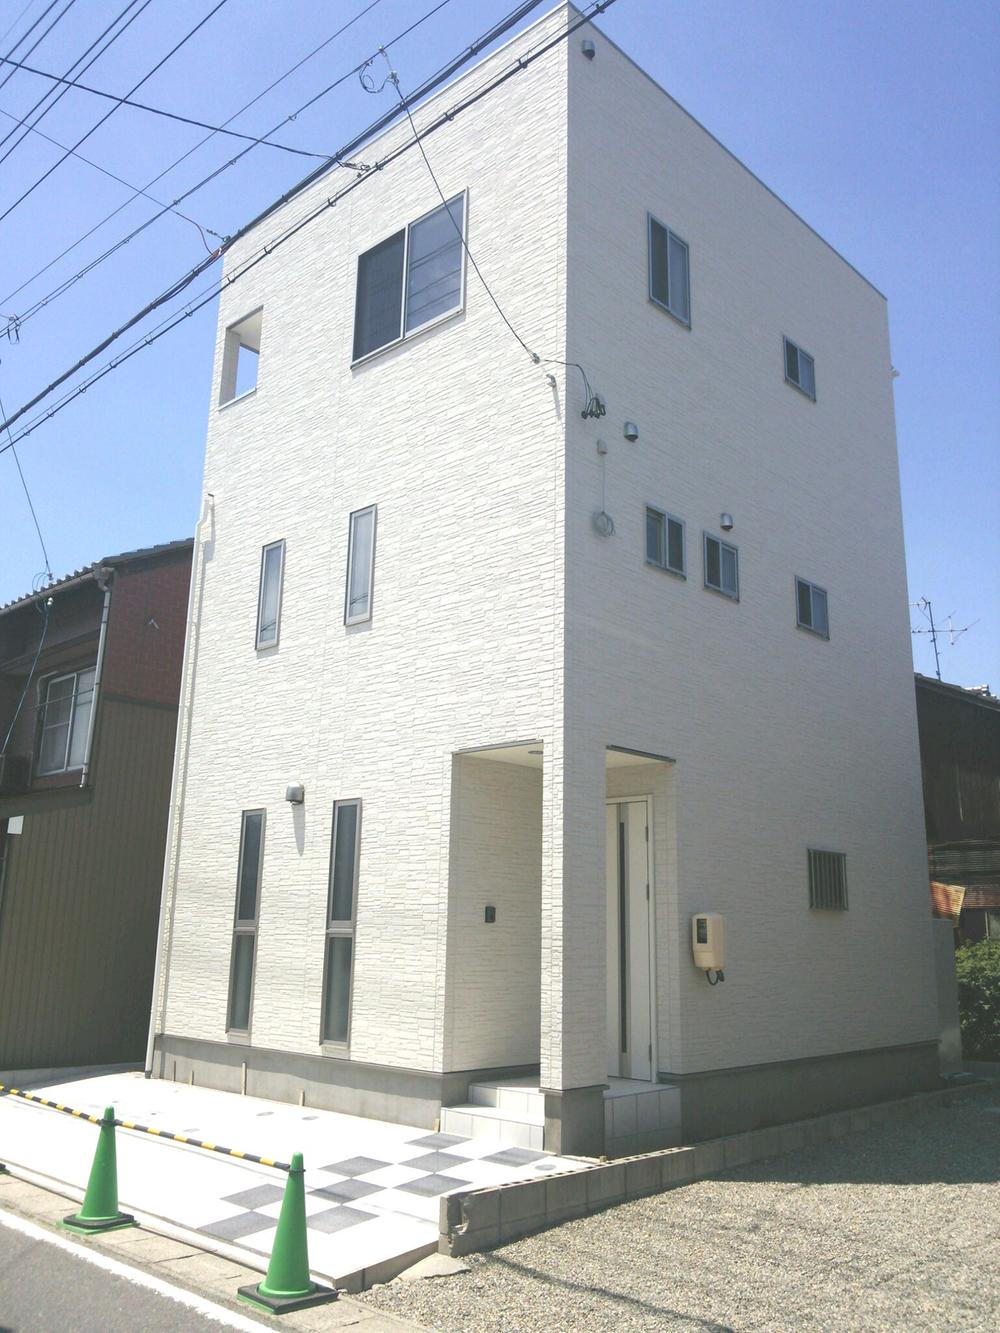 Local appearance photo. Three-story It was completed